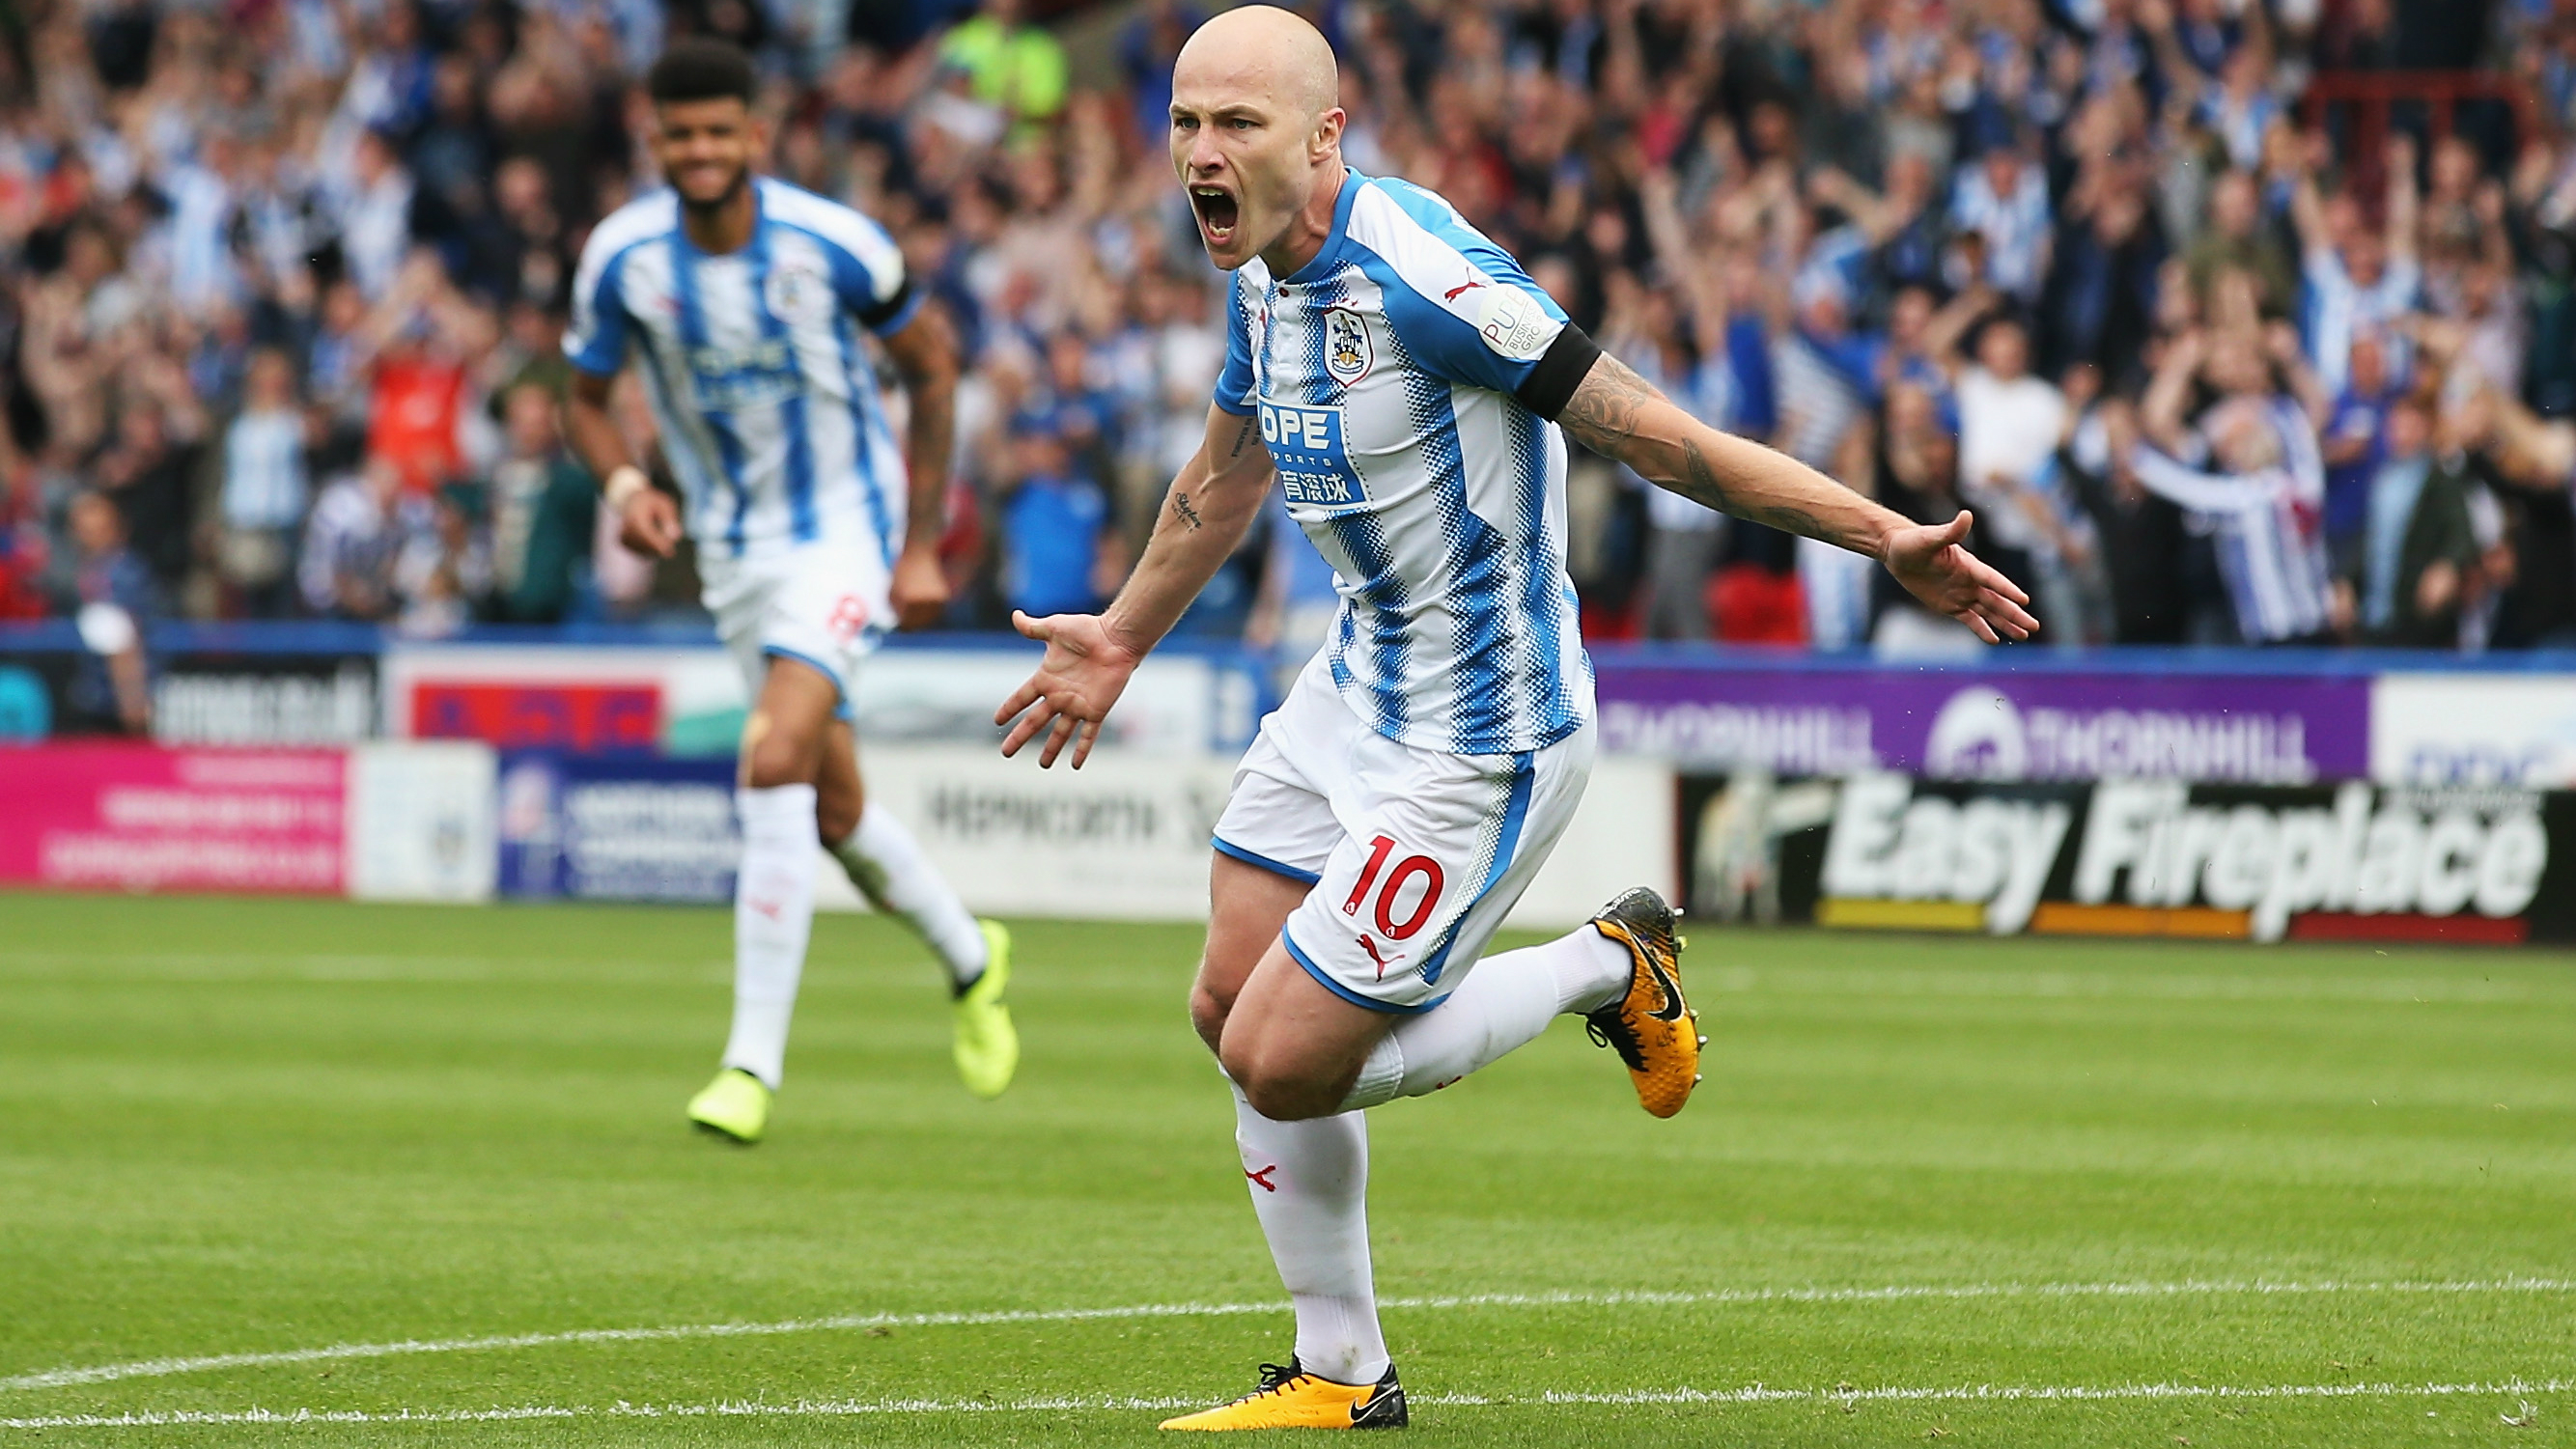 Aaron Mooy celebrates after scoring a superb winner for Huddersfield Town in the EPL against Newcastle United.